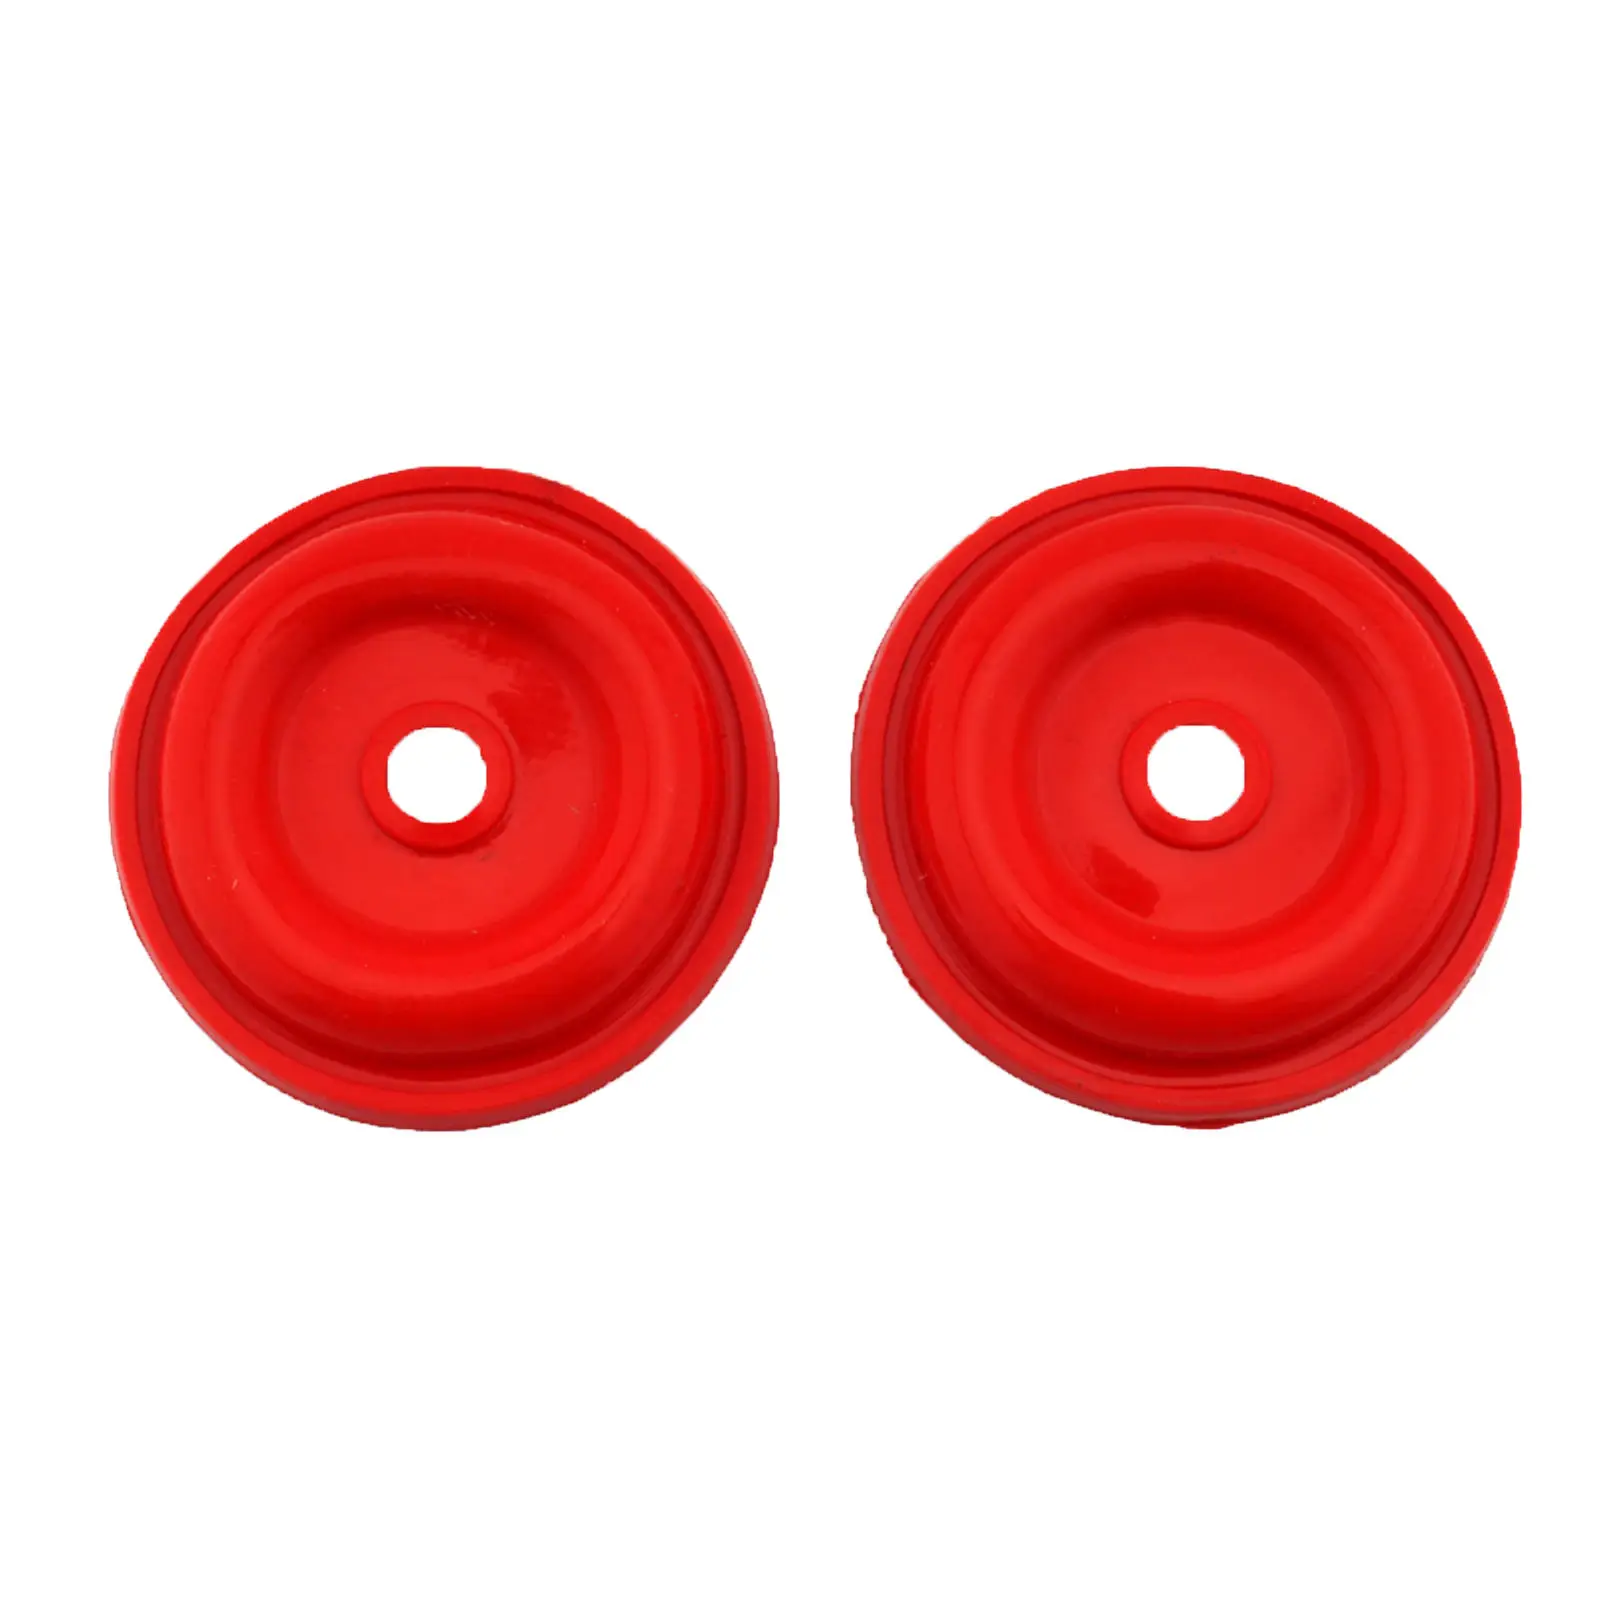 2x Exhaust Valve Bellows 5414495 5410000 5412733 5412147 Fits for Polaris Snowmobiles 440 to 900 Boat Accessories Red